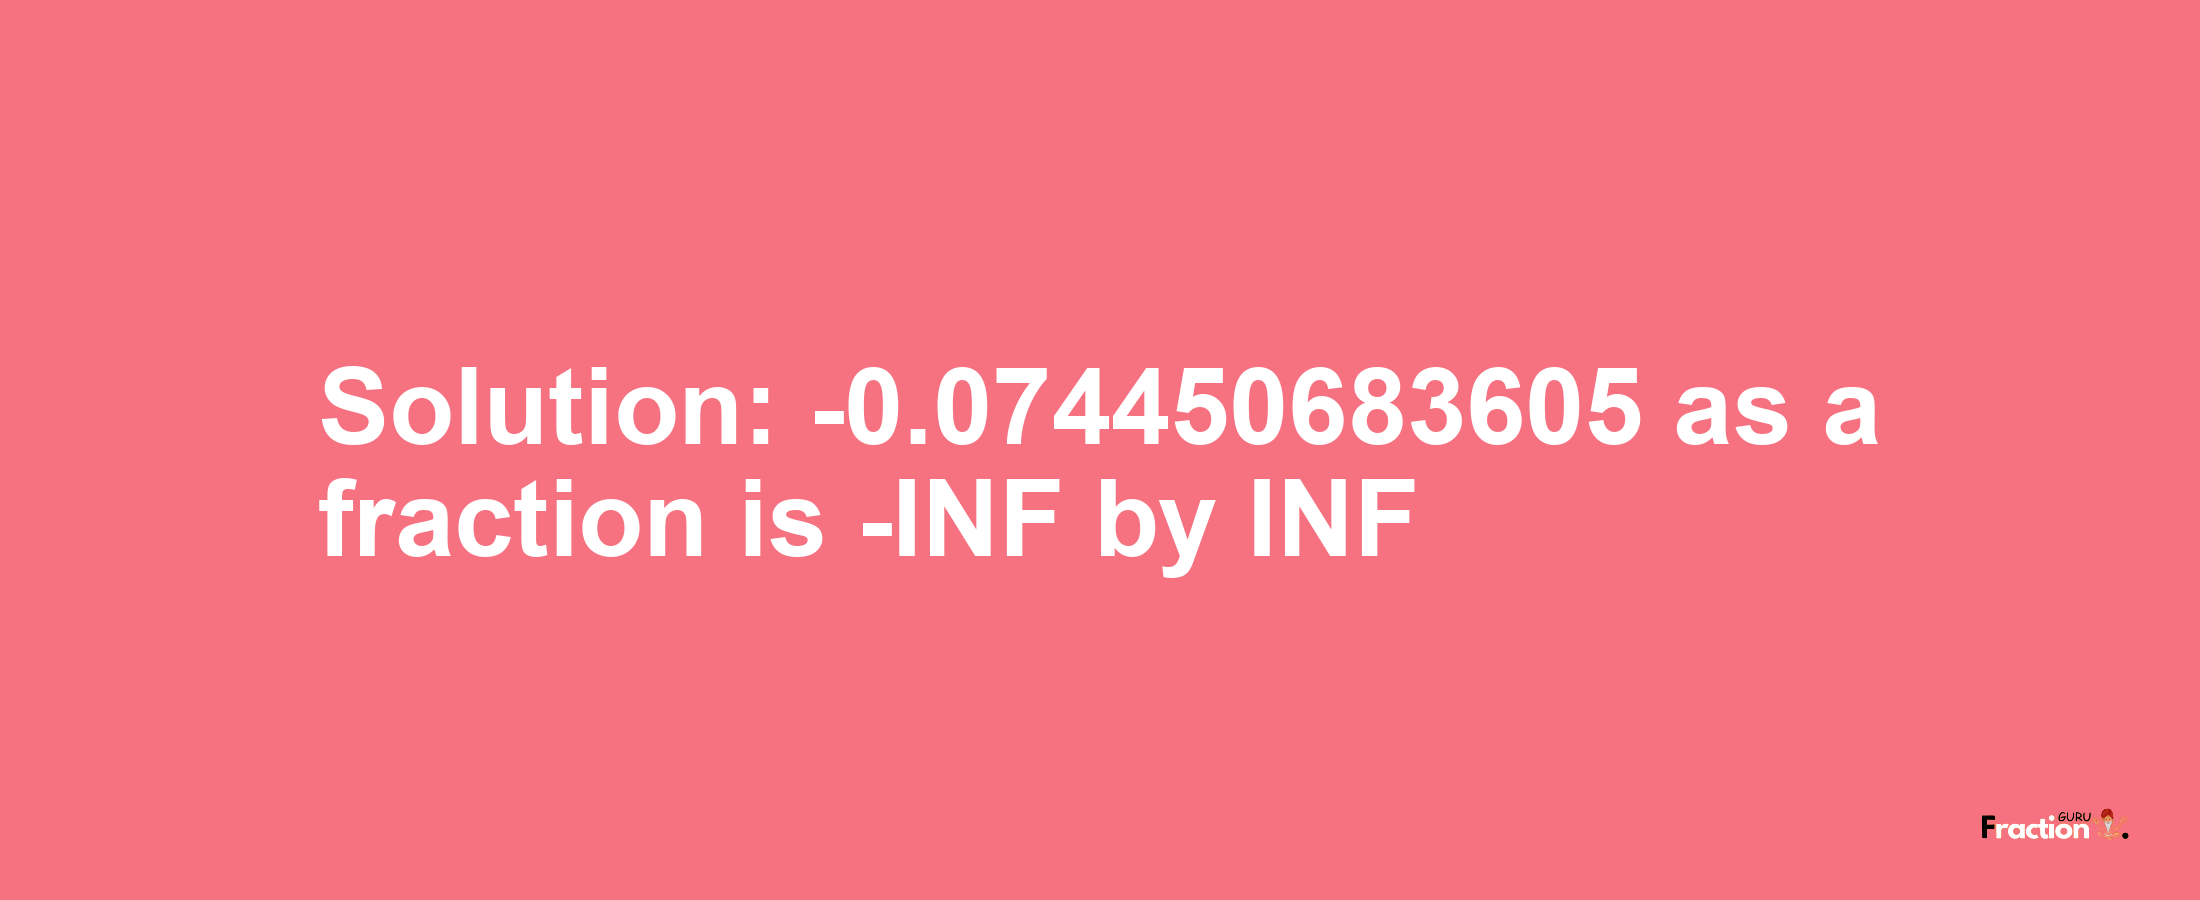 Solution:-0.074450683605 as a fraction is -INF/INF